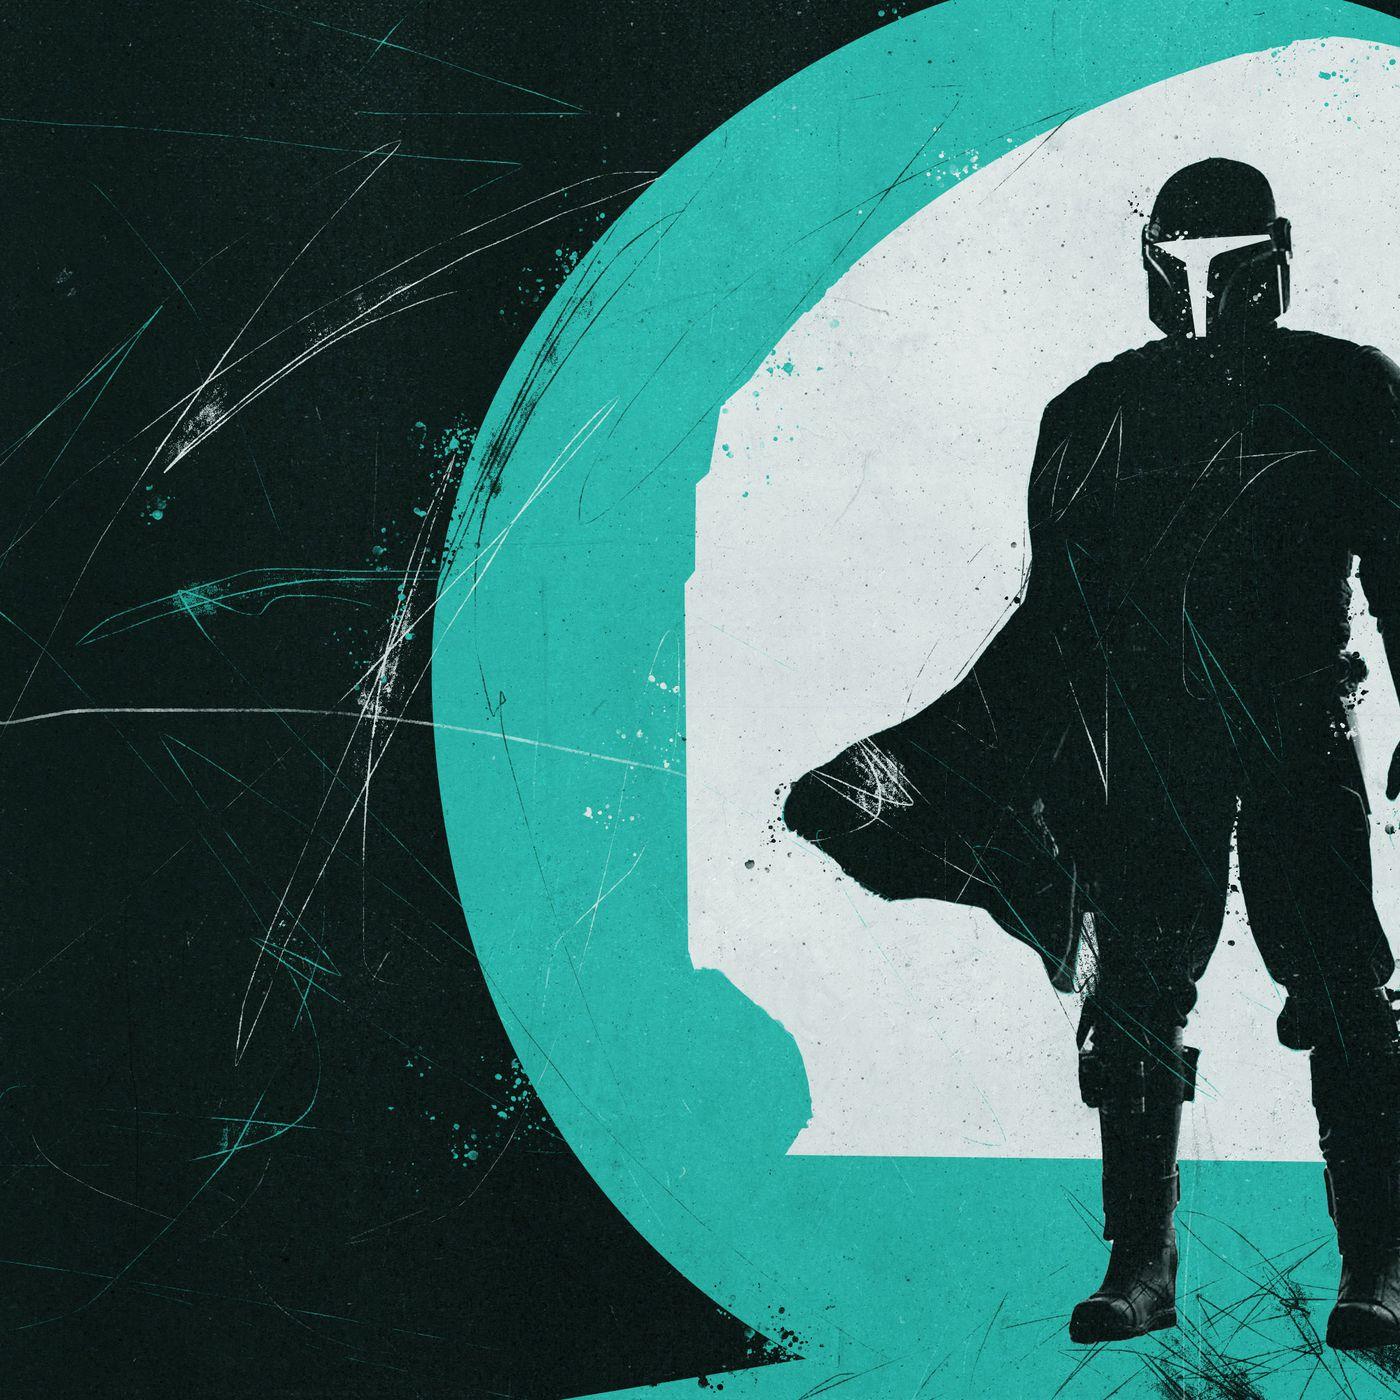 The 'Mandalorian' Trailer: Prepare for a New Side of 'Star